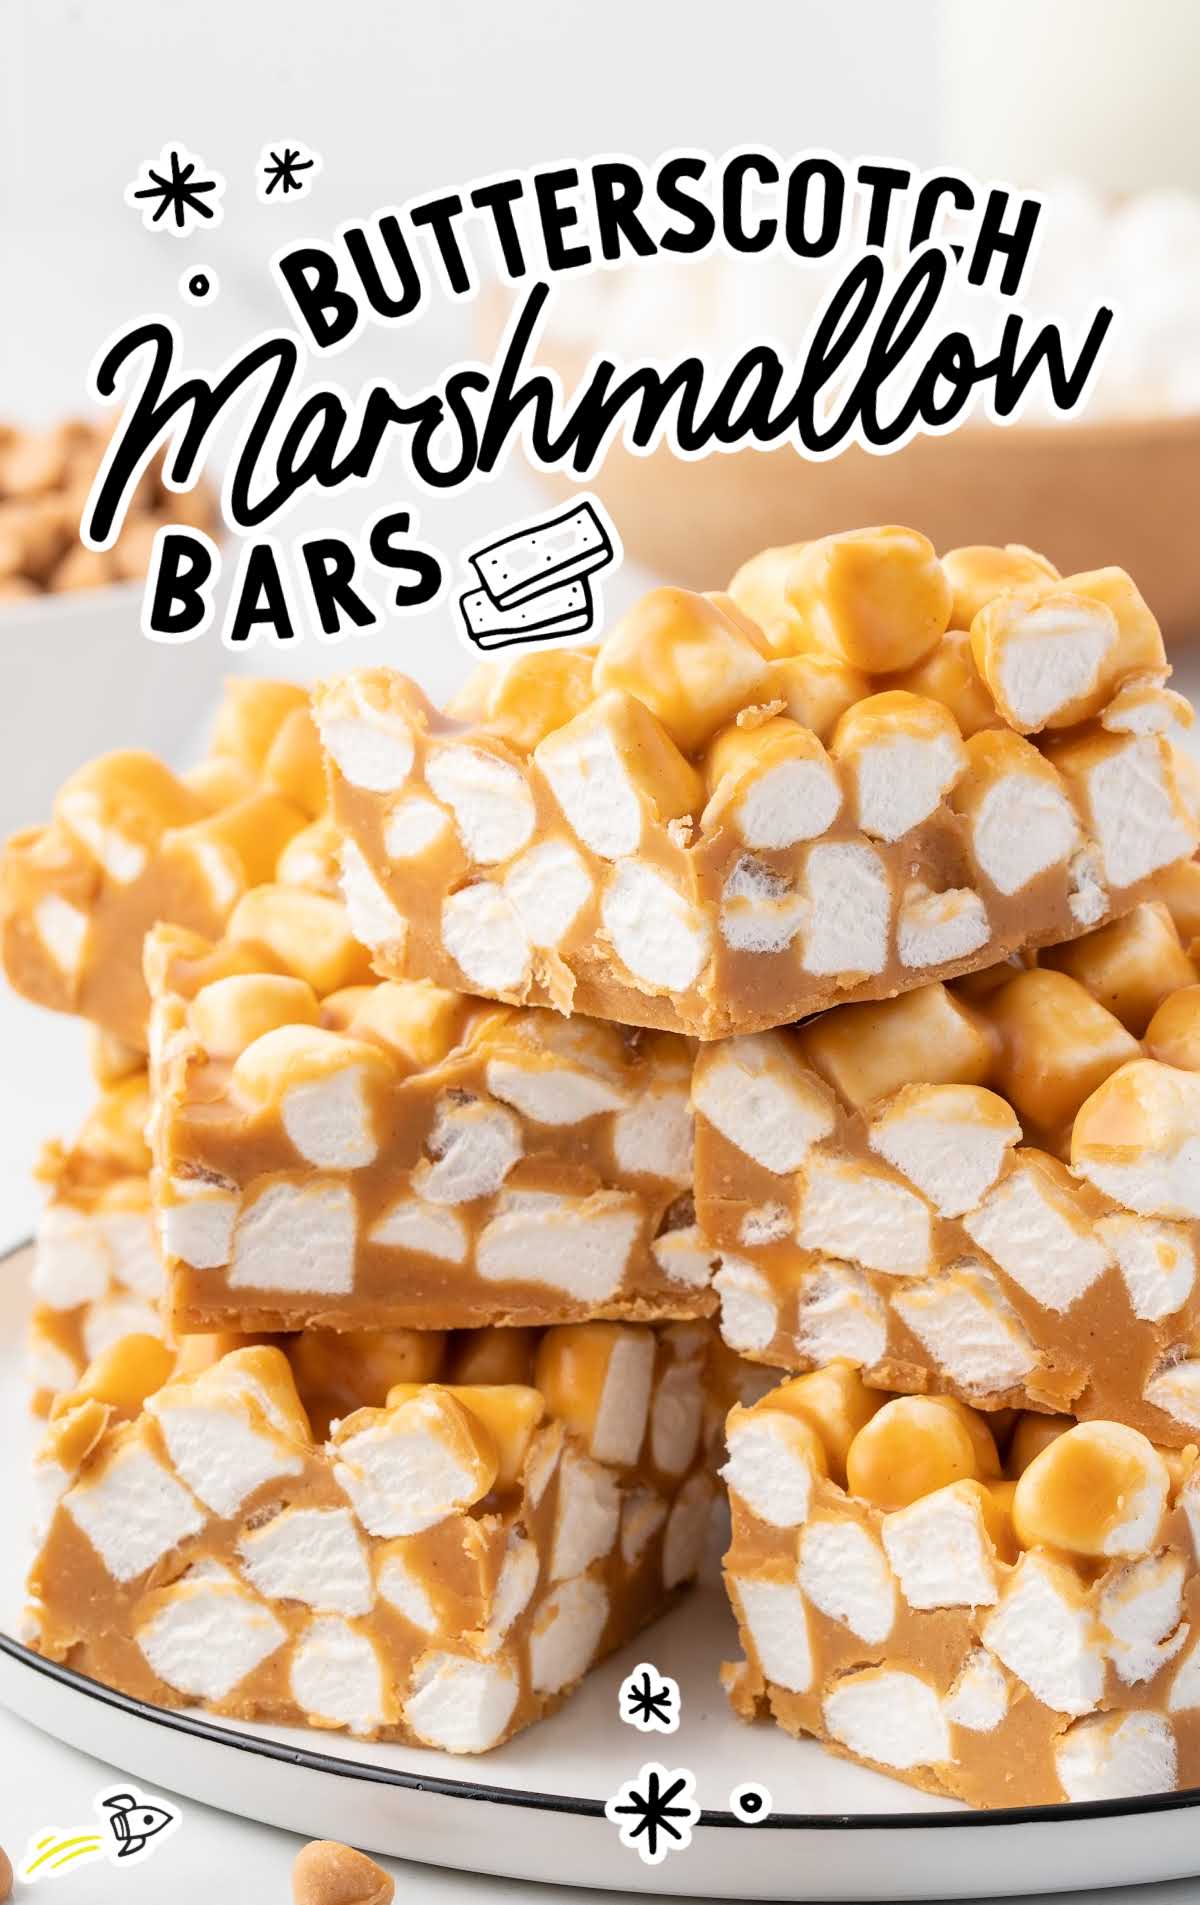 a close up shot of Butterscotch Marshmallow Bars stacked on top of each other on a plate